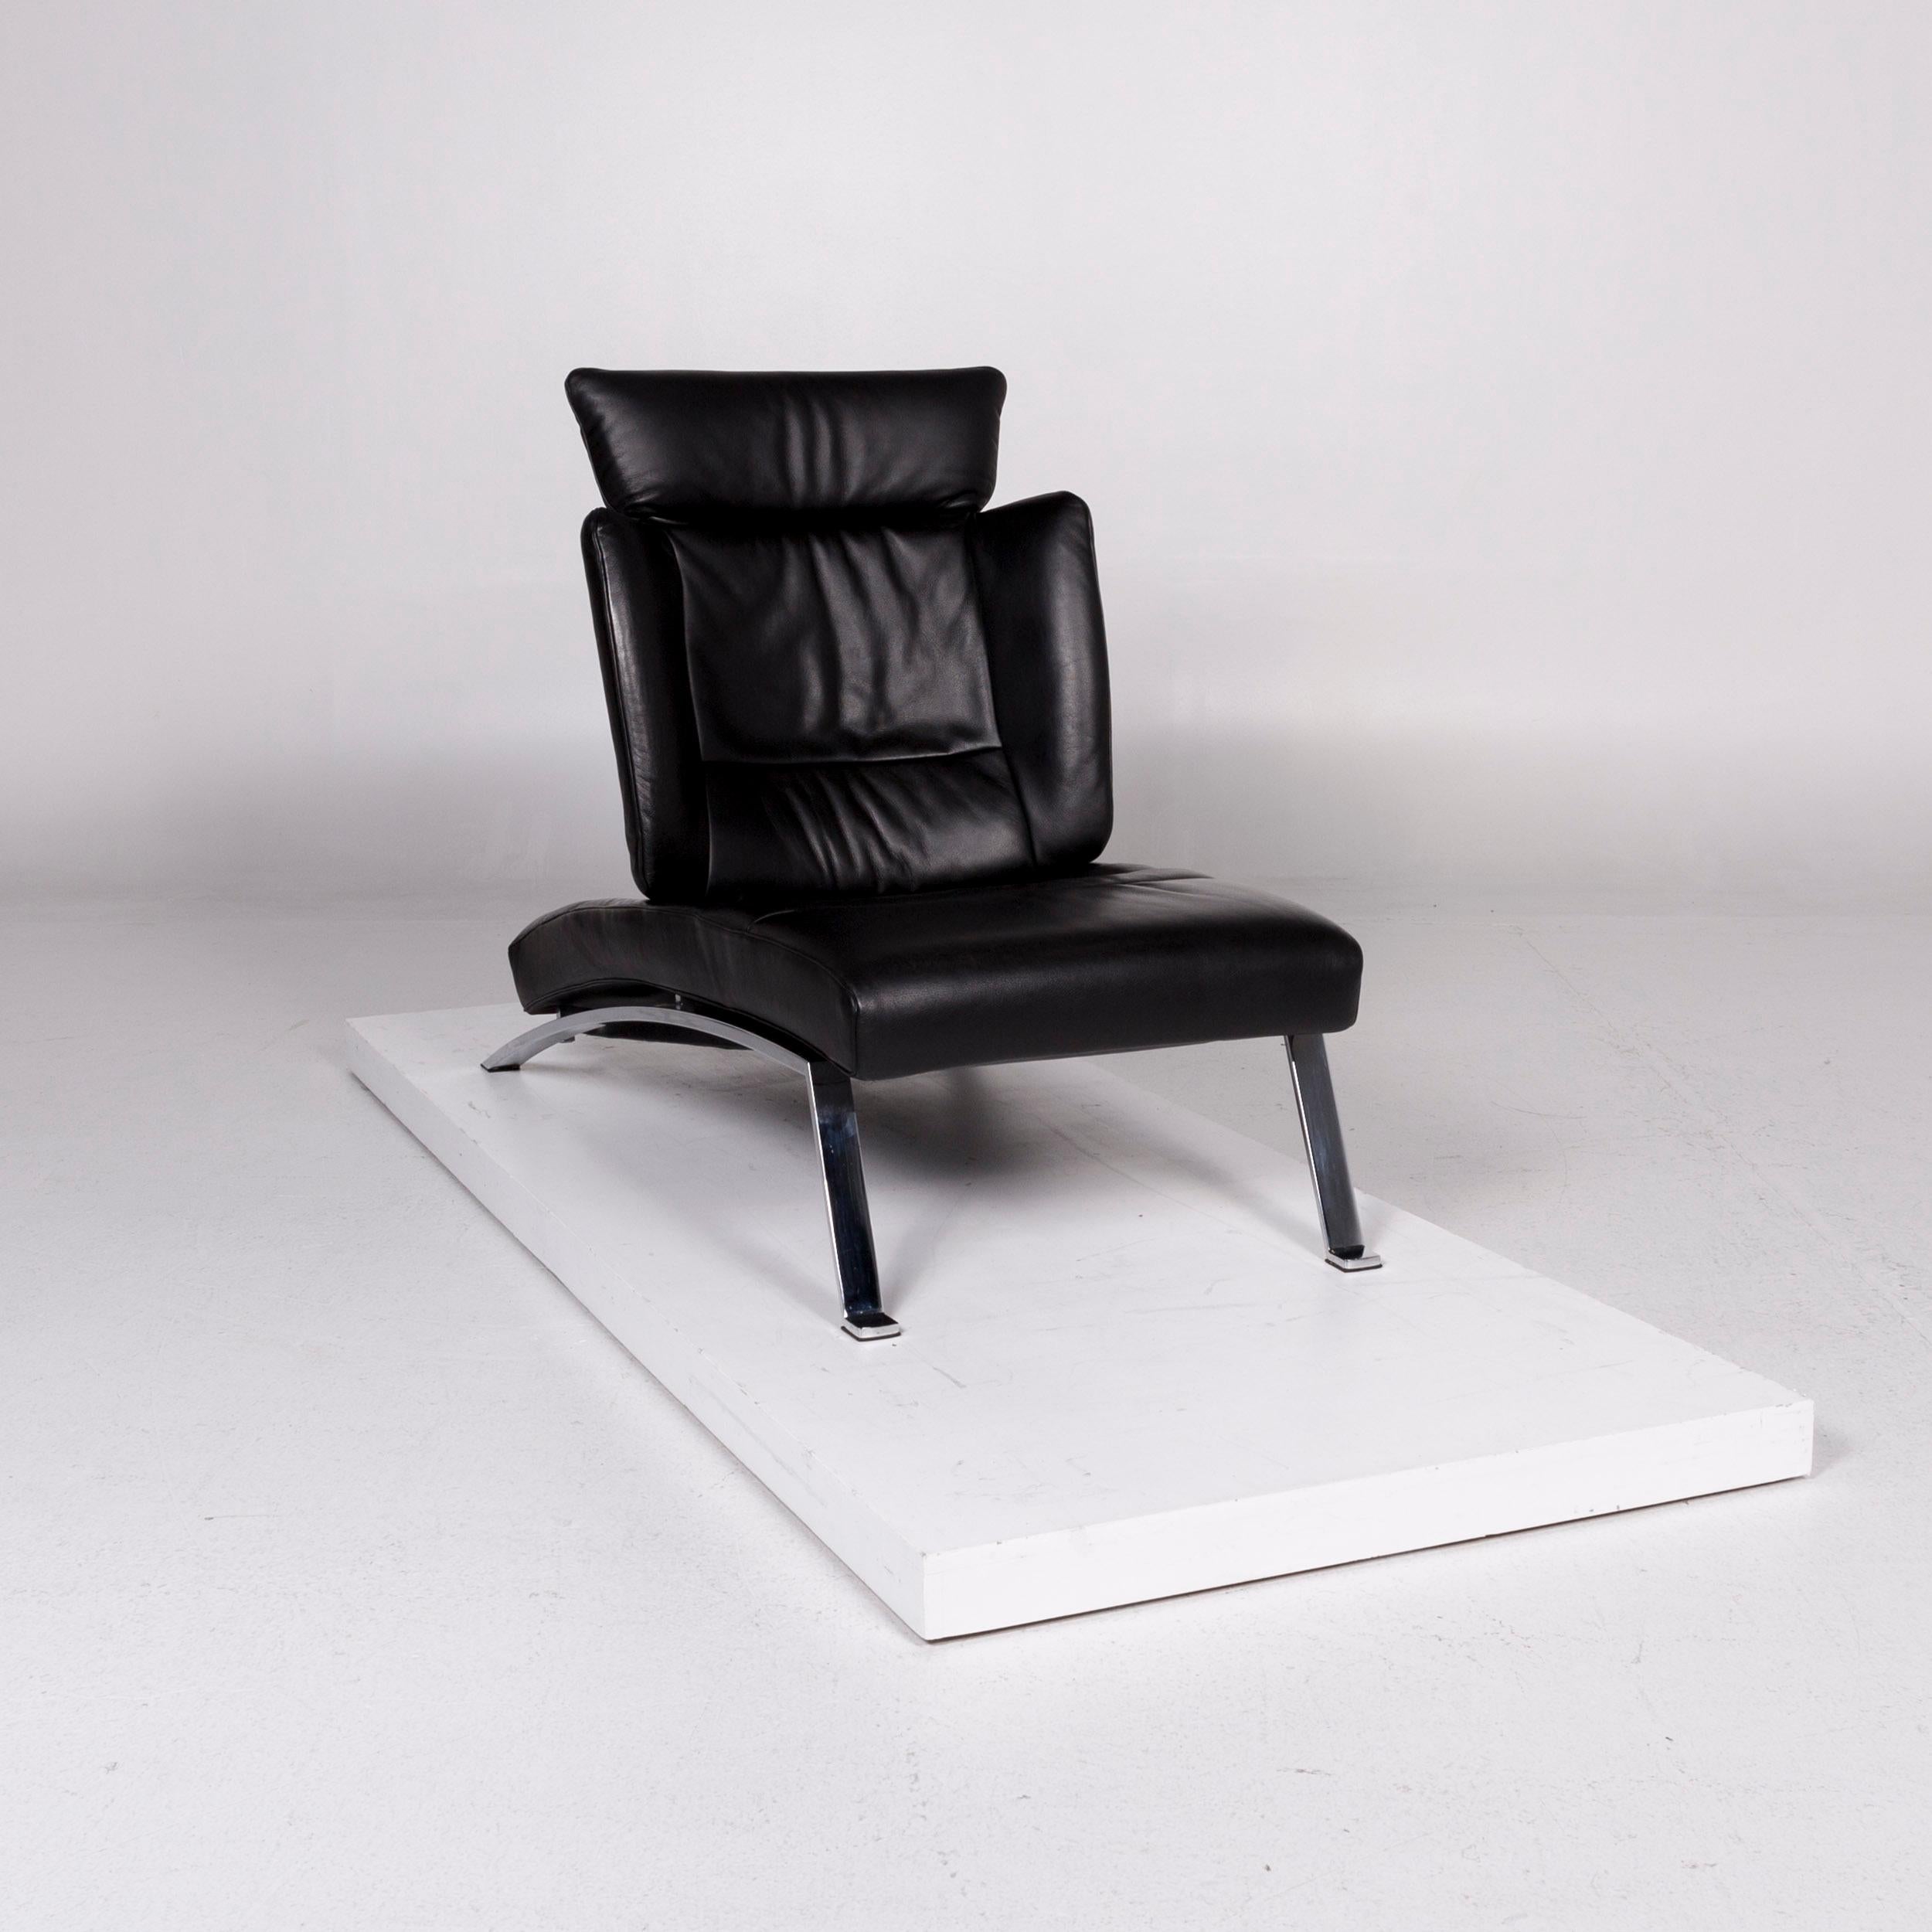 De Sede Leather Lounger Black Function Relax Lounger In Good Condition For Sale In Cologne, DE